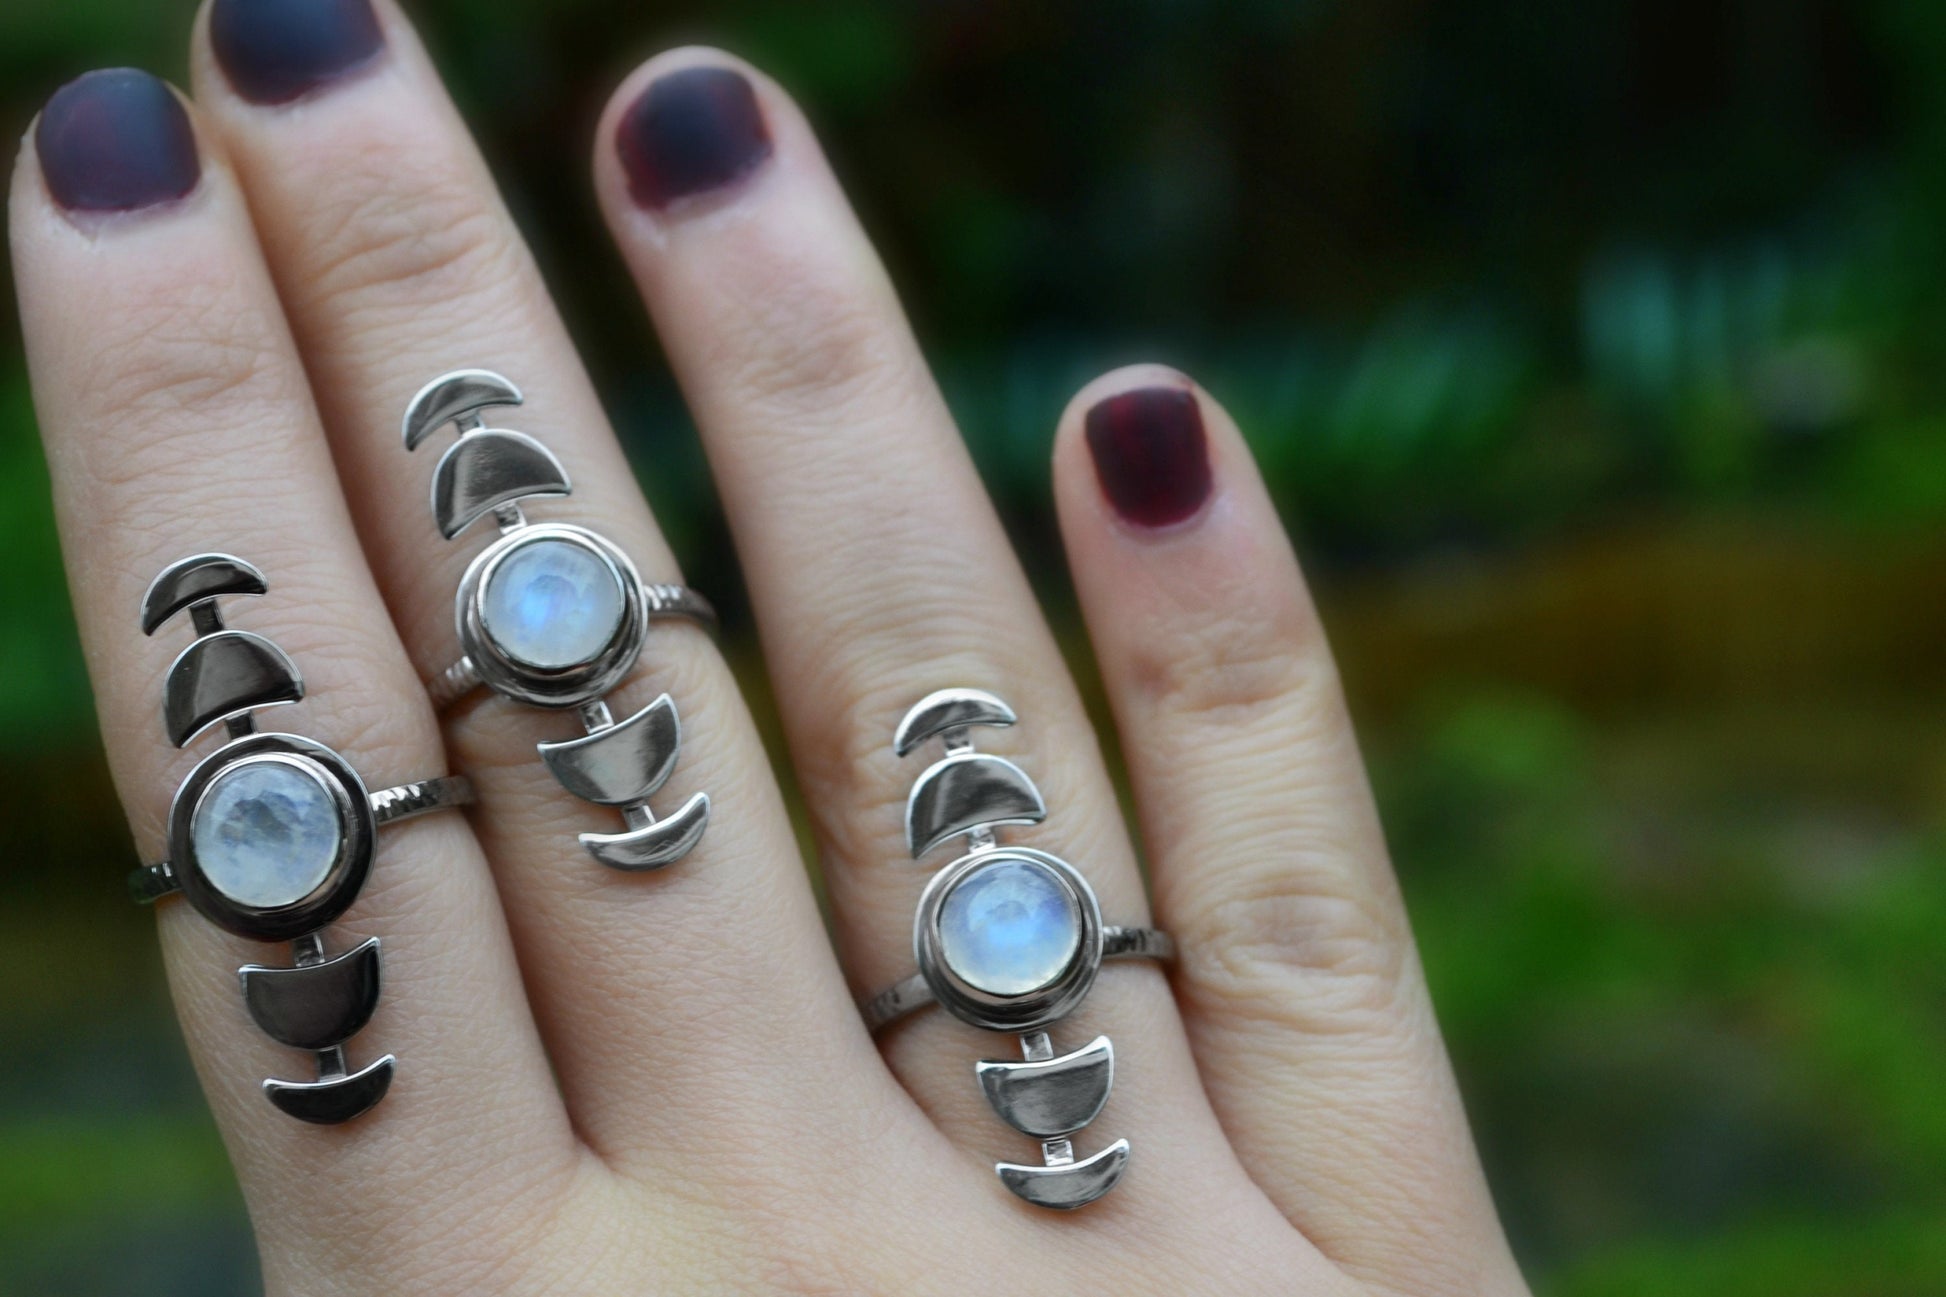 Moon Phases Ring, Moon Ring, Fine Sterling Silver Rainbow Moonstone Ring, Adjustable Ring, Celestial Jewelry, Boho Rings, Unique Gift